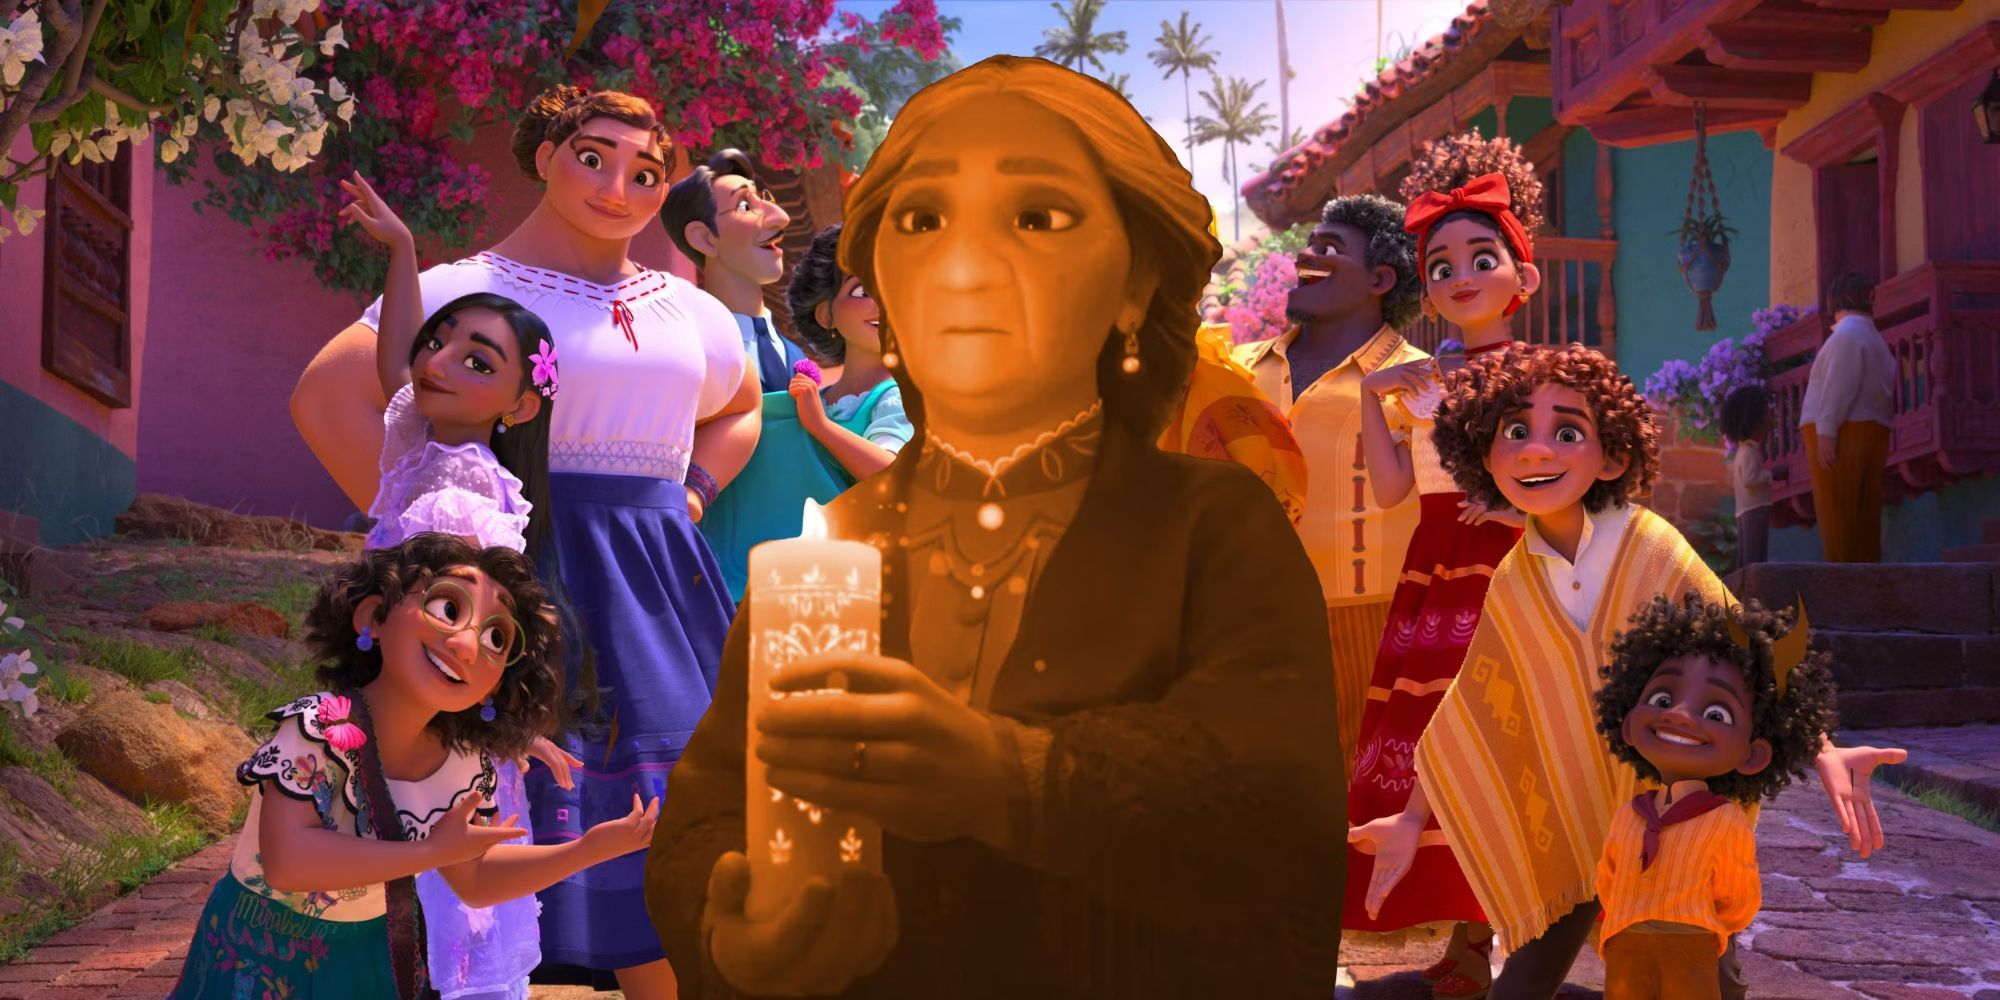 Abuela holding a candle with the Madrigal family in the background in Encanto